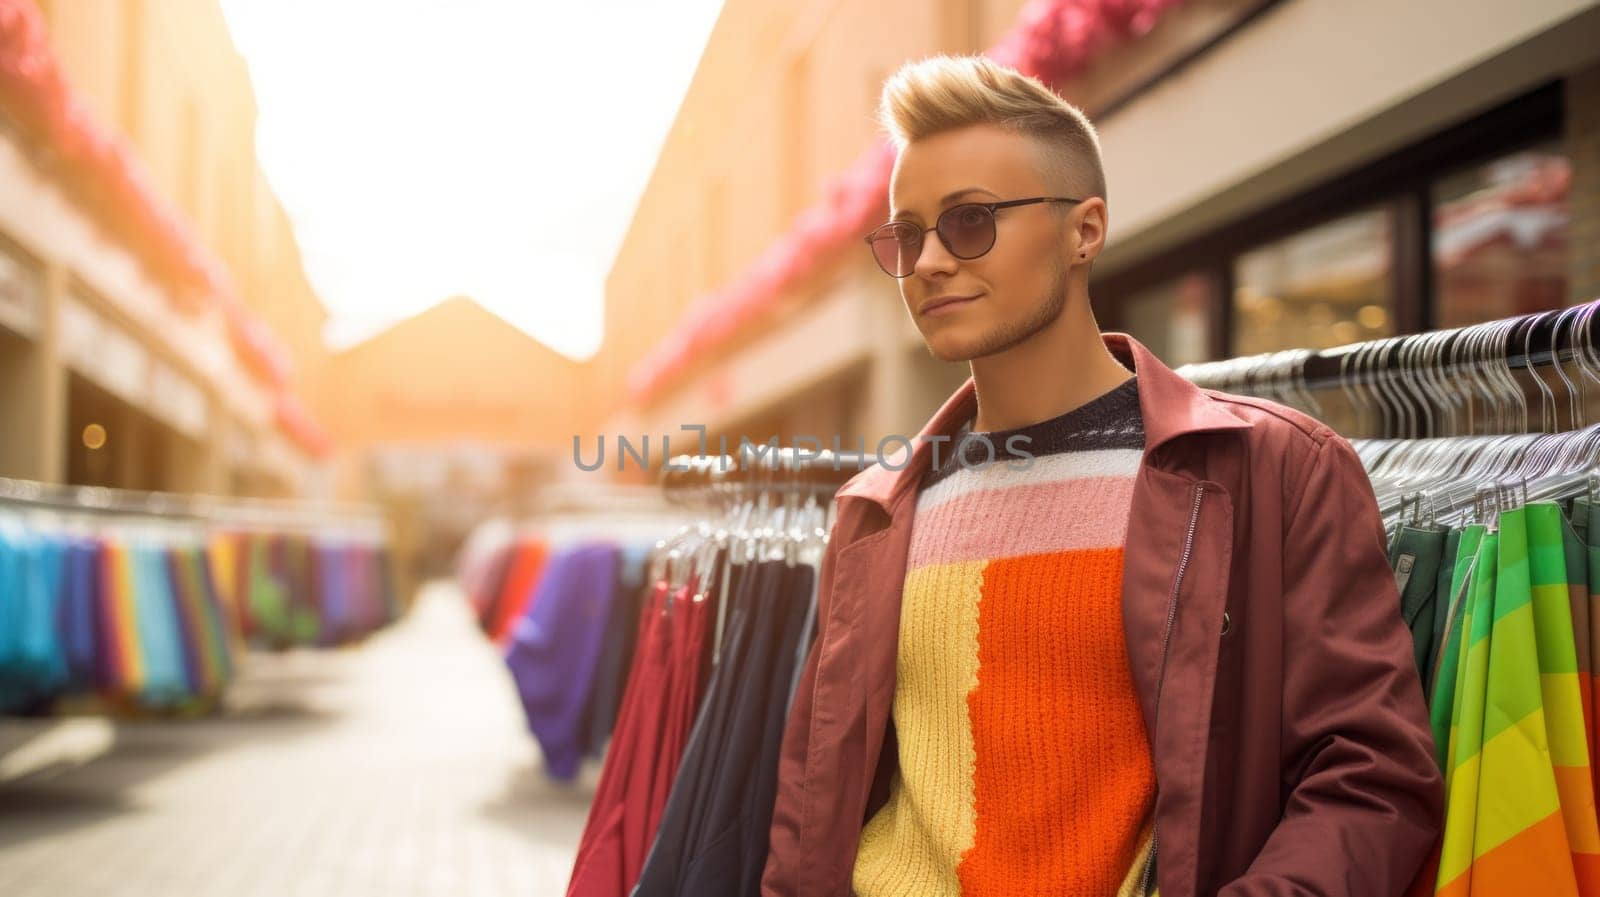 A man in a jacket and sunglasses standing next to racks of clothes